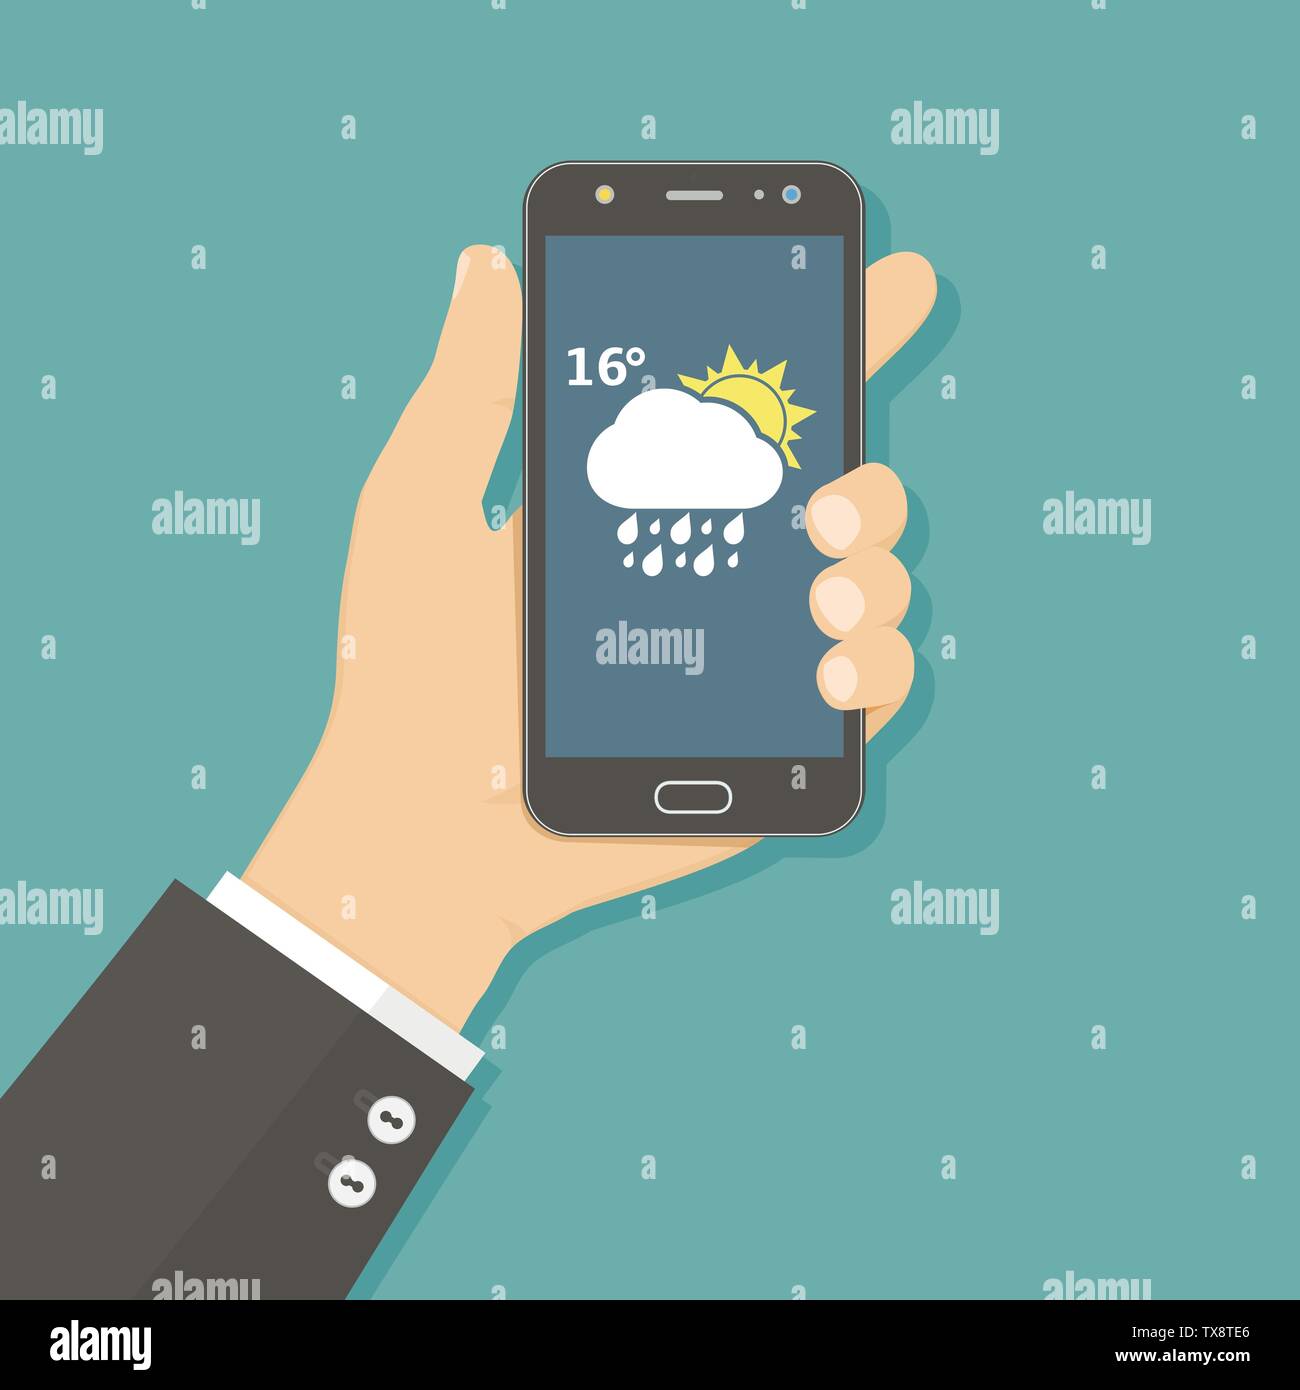 Flat design concept with hand holding mobile phone with weather app Stock Vector